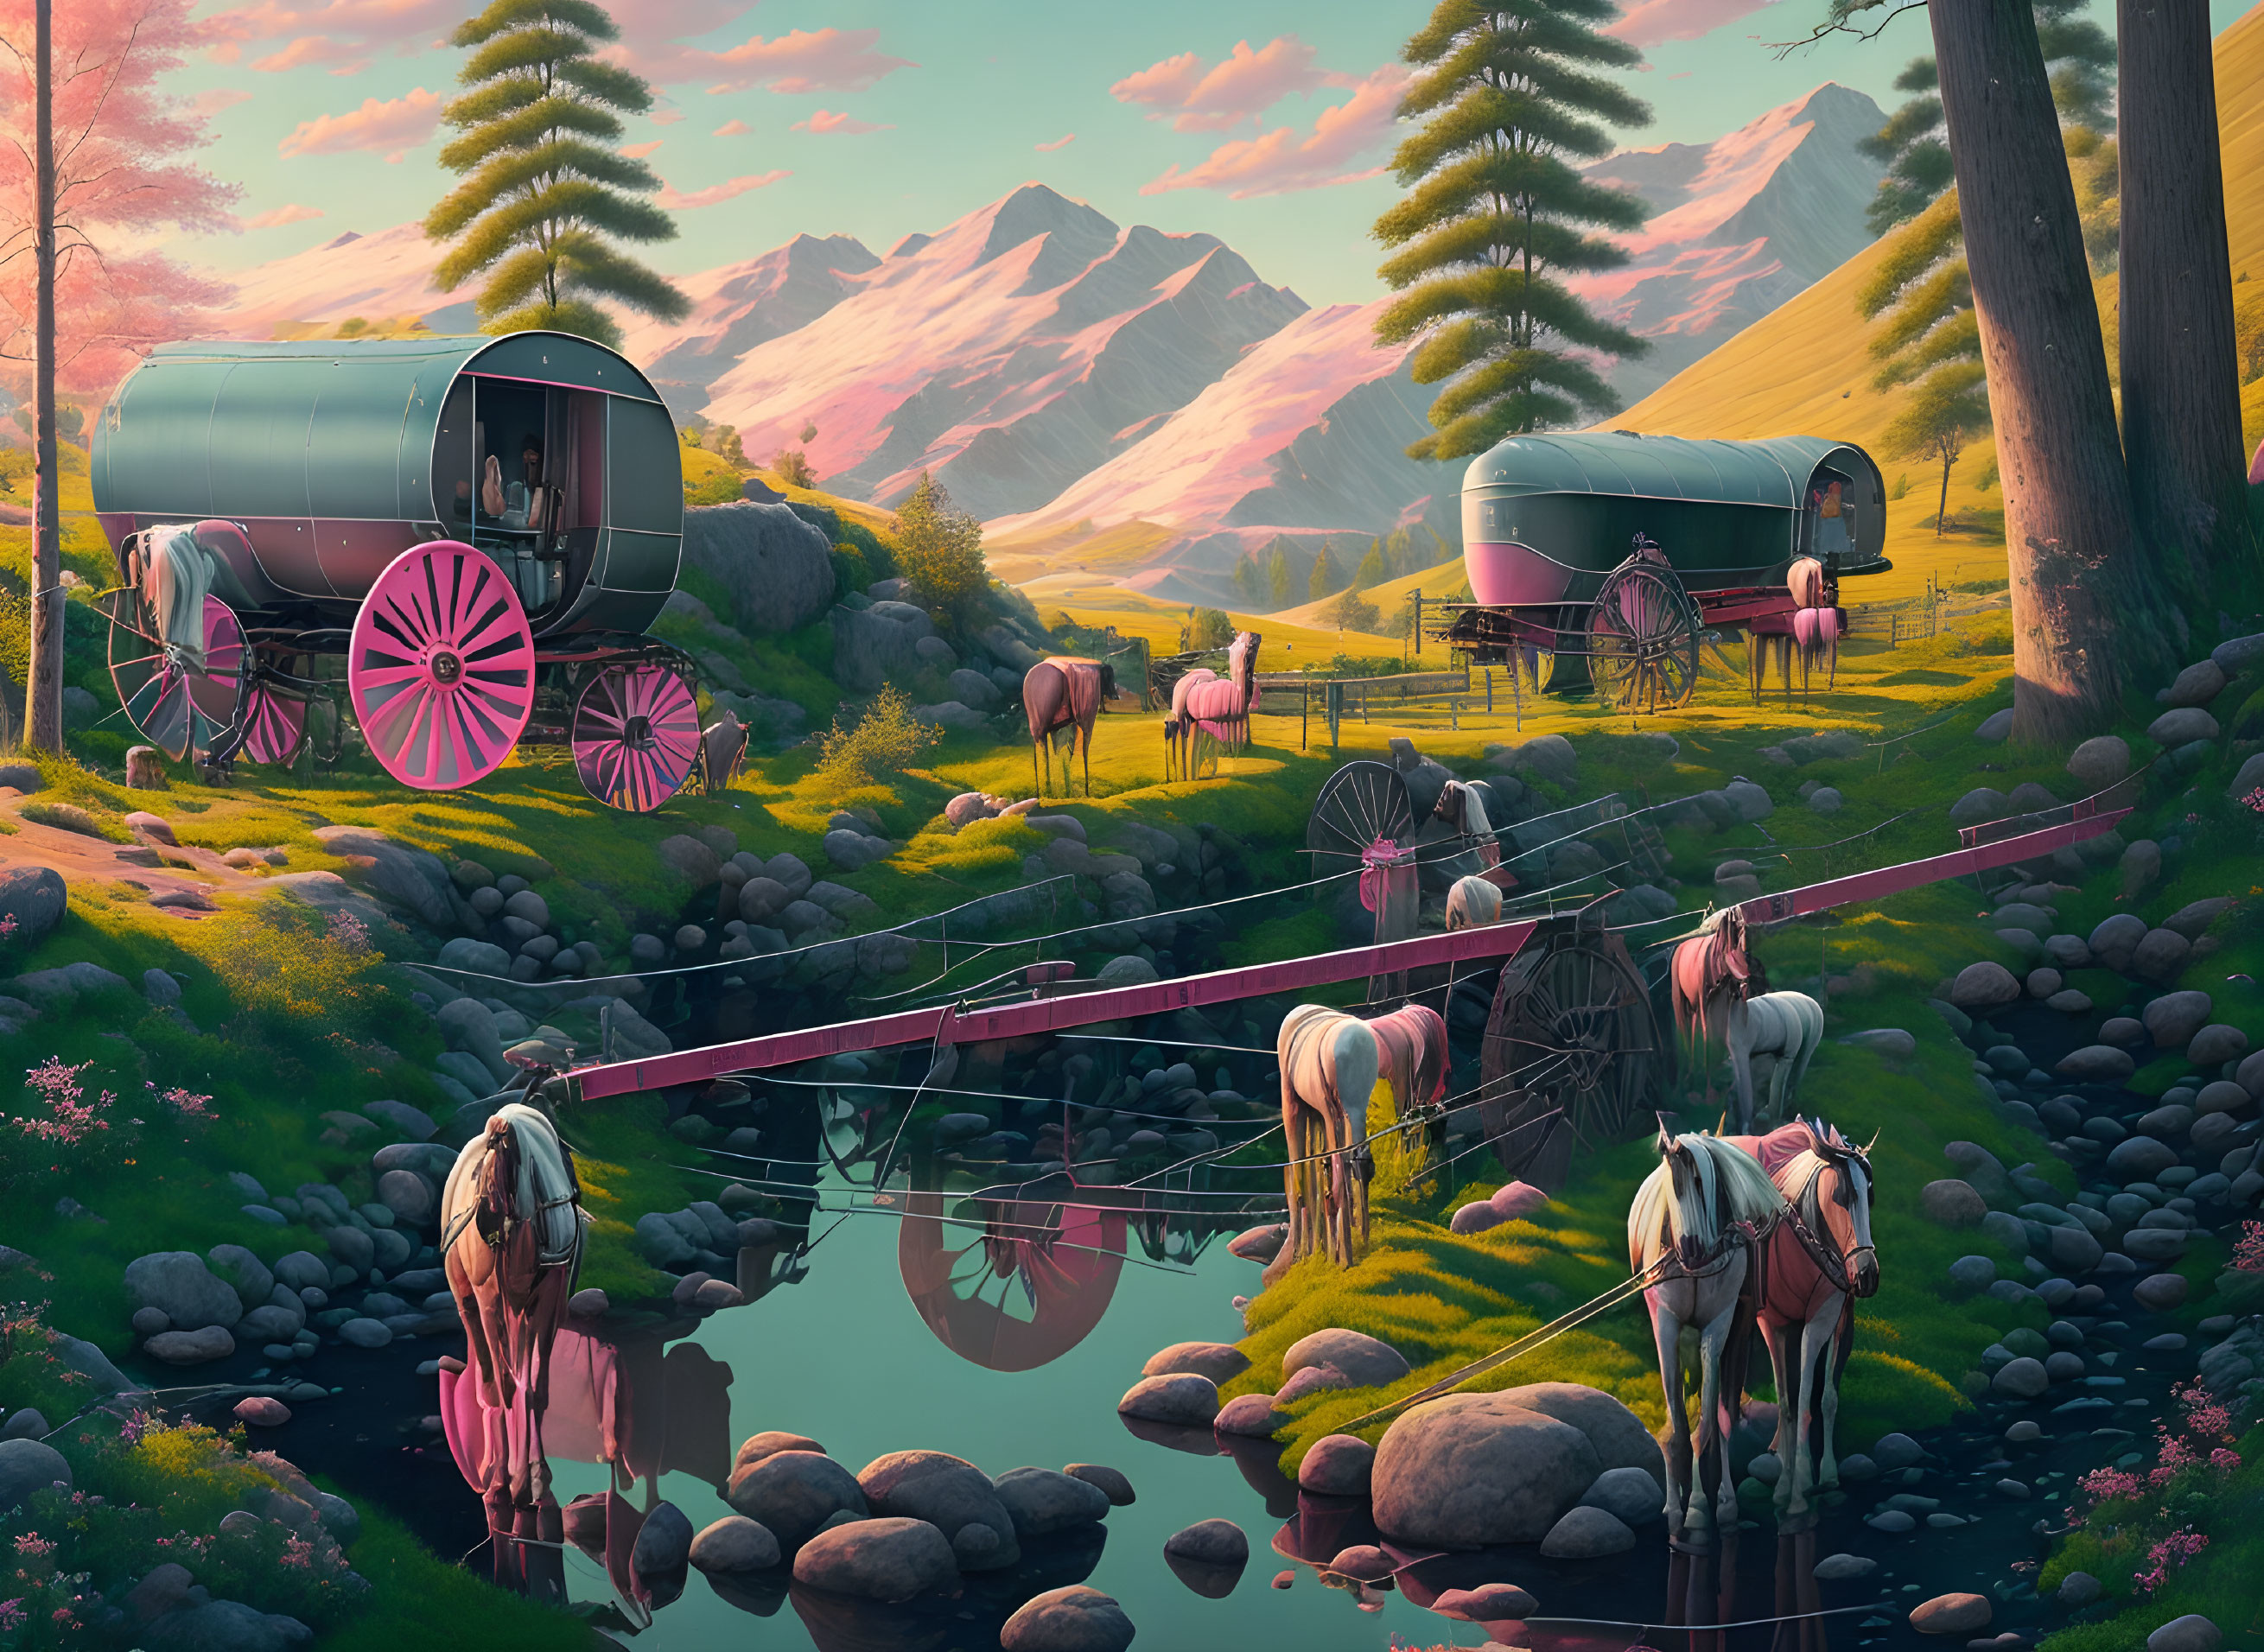 Tranquil scenery of covered wagons, horses, and wooden bridge in nature